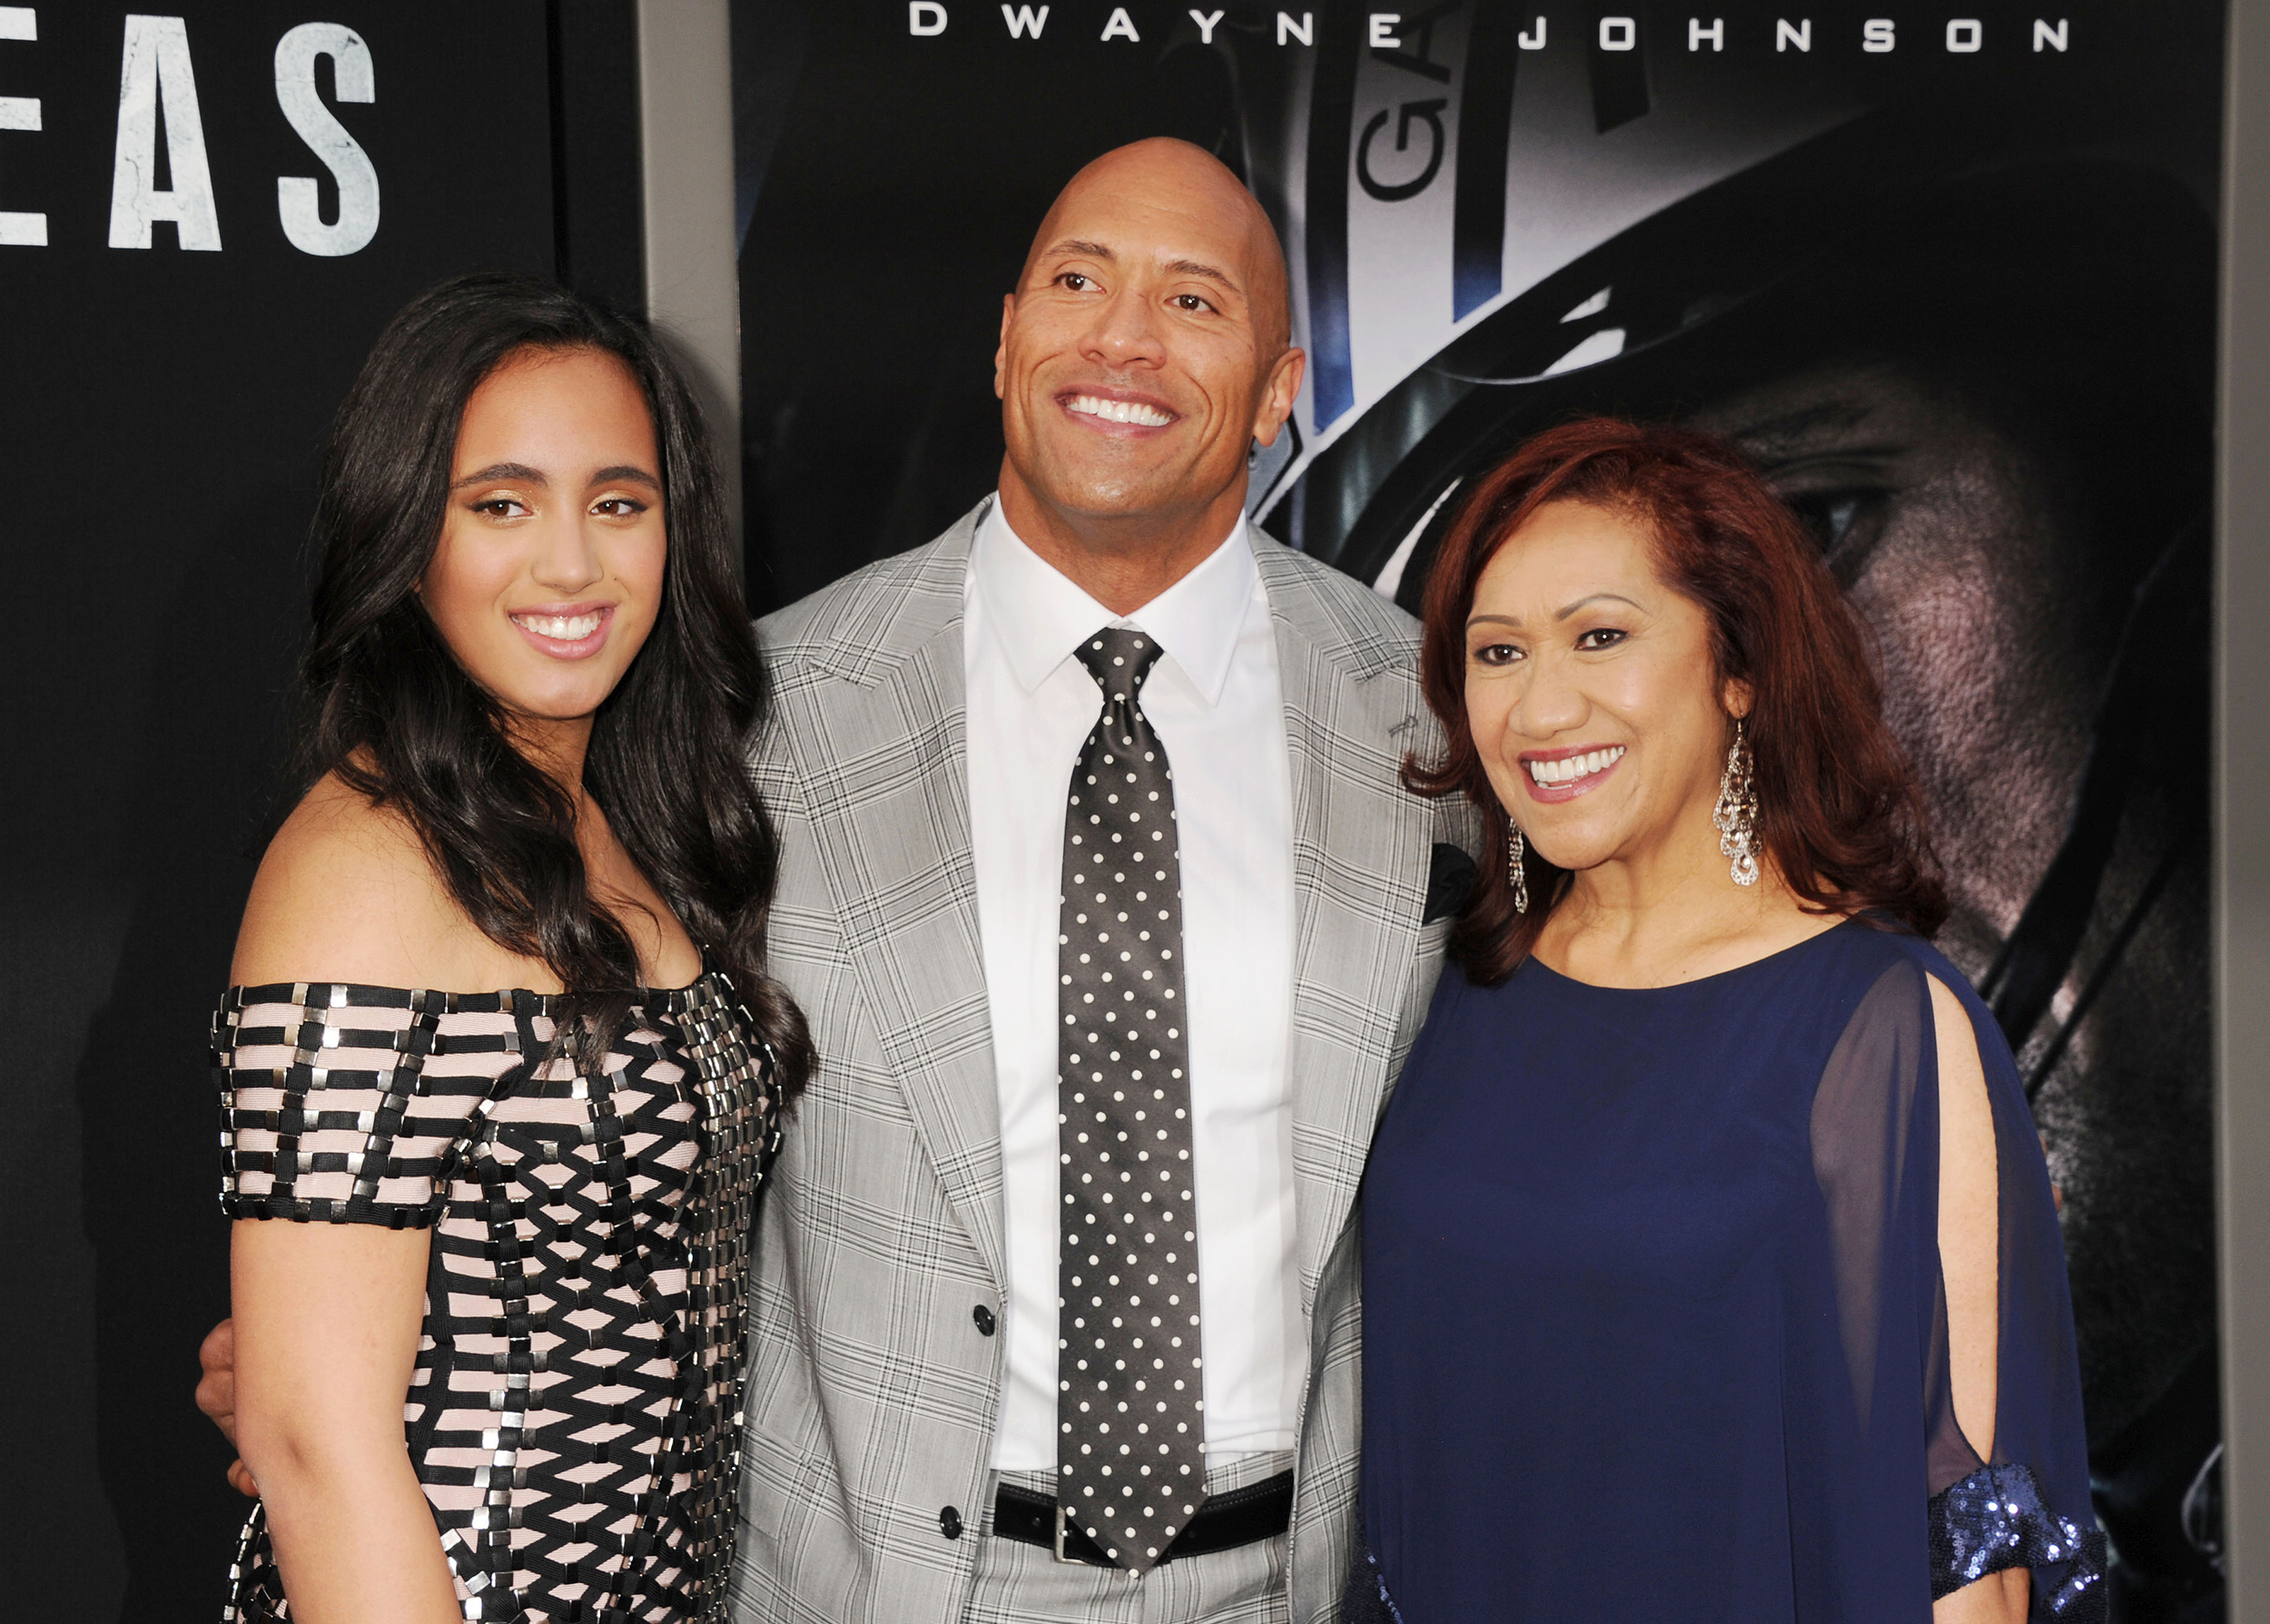 See The Rock’s Beautiful Daughter As She Prepares For Her Wrestling Debut, Continuing Her Father’s Illustrious Legacy. – The Rock